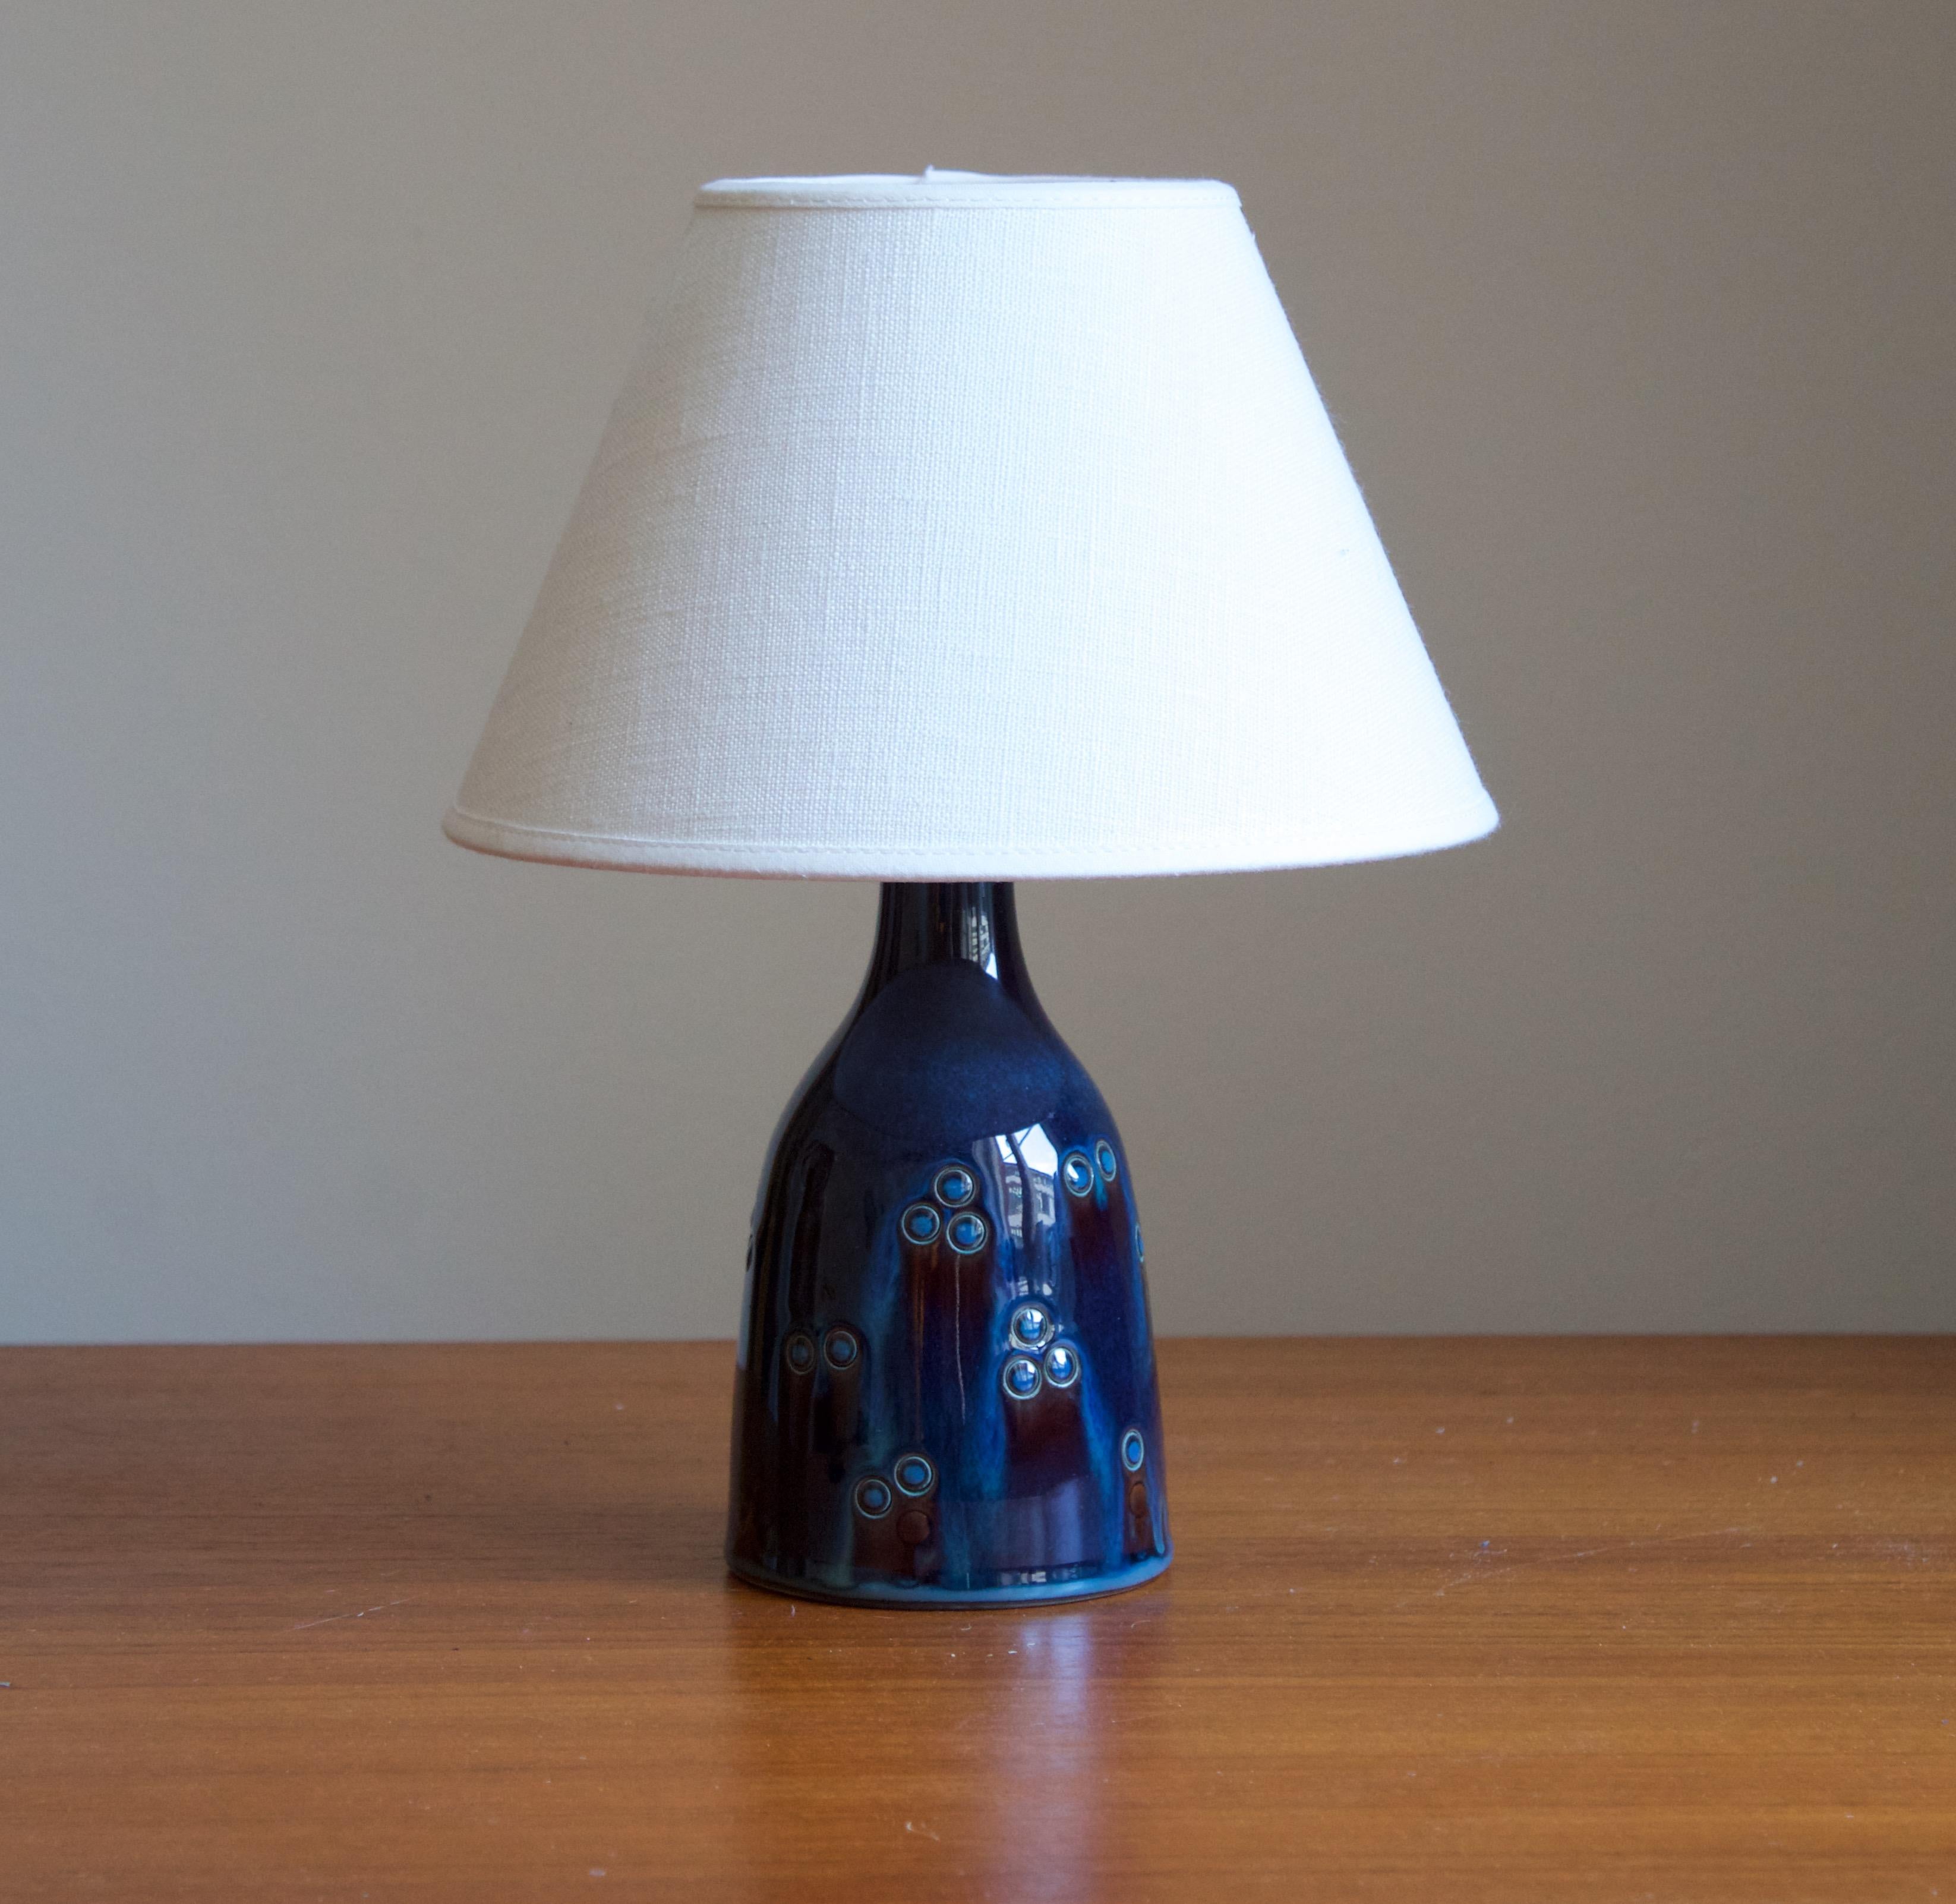 A small table lamp produced by Søholm Keramik, located on the island of Bornholm in Denmark. Features a highly artistic green / blue glaze.

Stated dimensions exclude lampshade. Height includes socket. Sold without lampshade.

Glaze features a blue